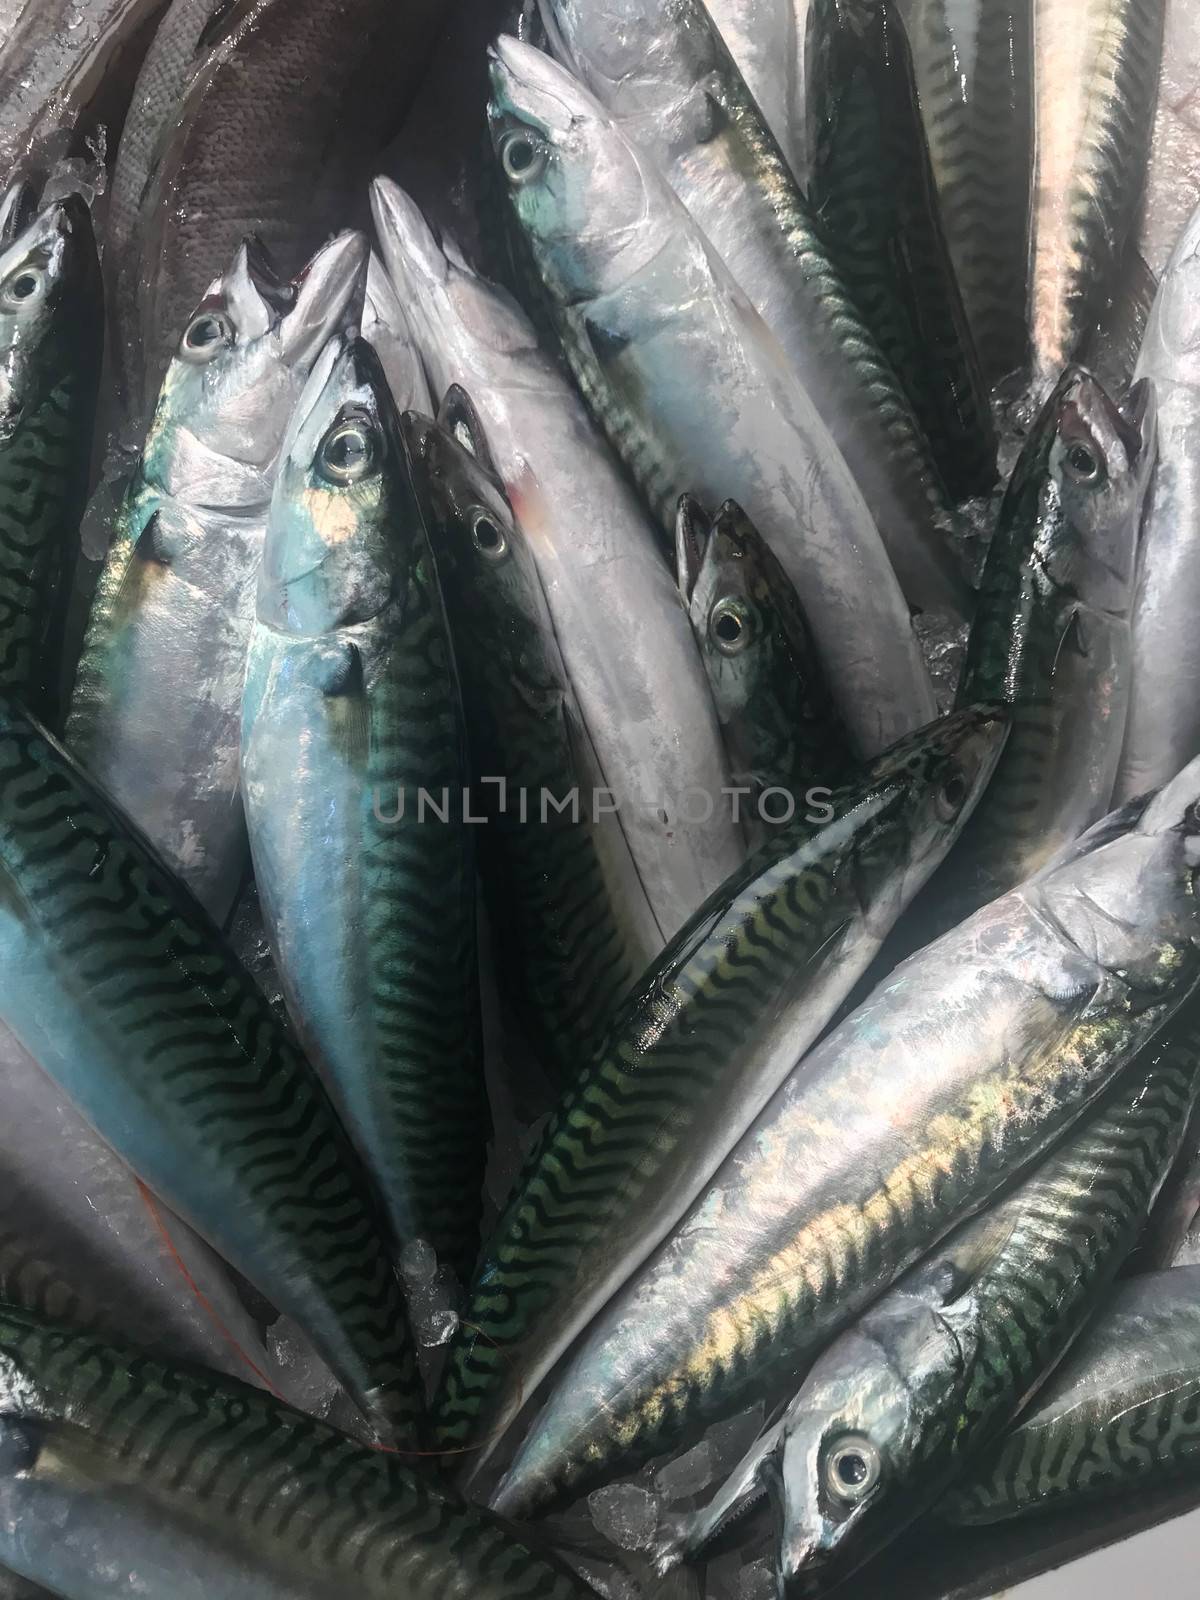 Mackerels for sale in fish market by cosca